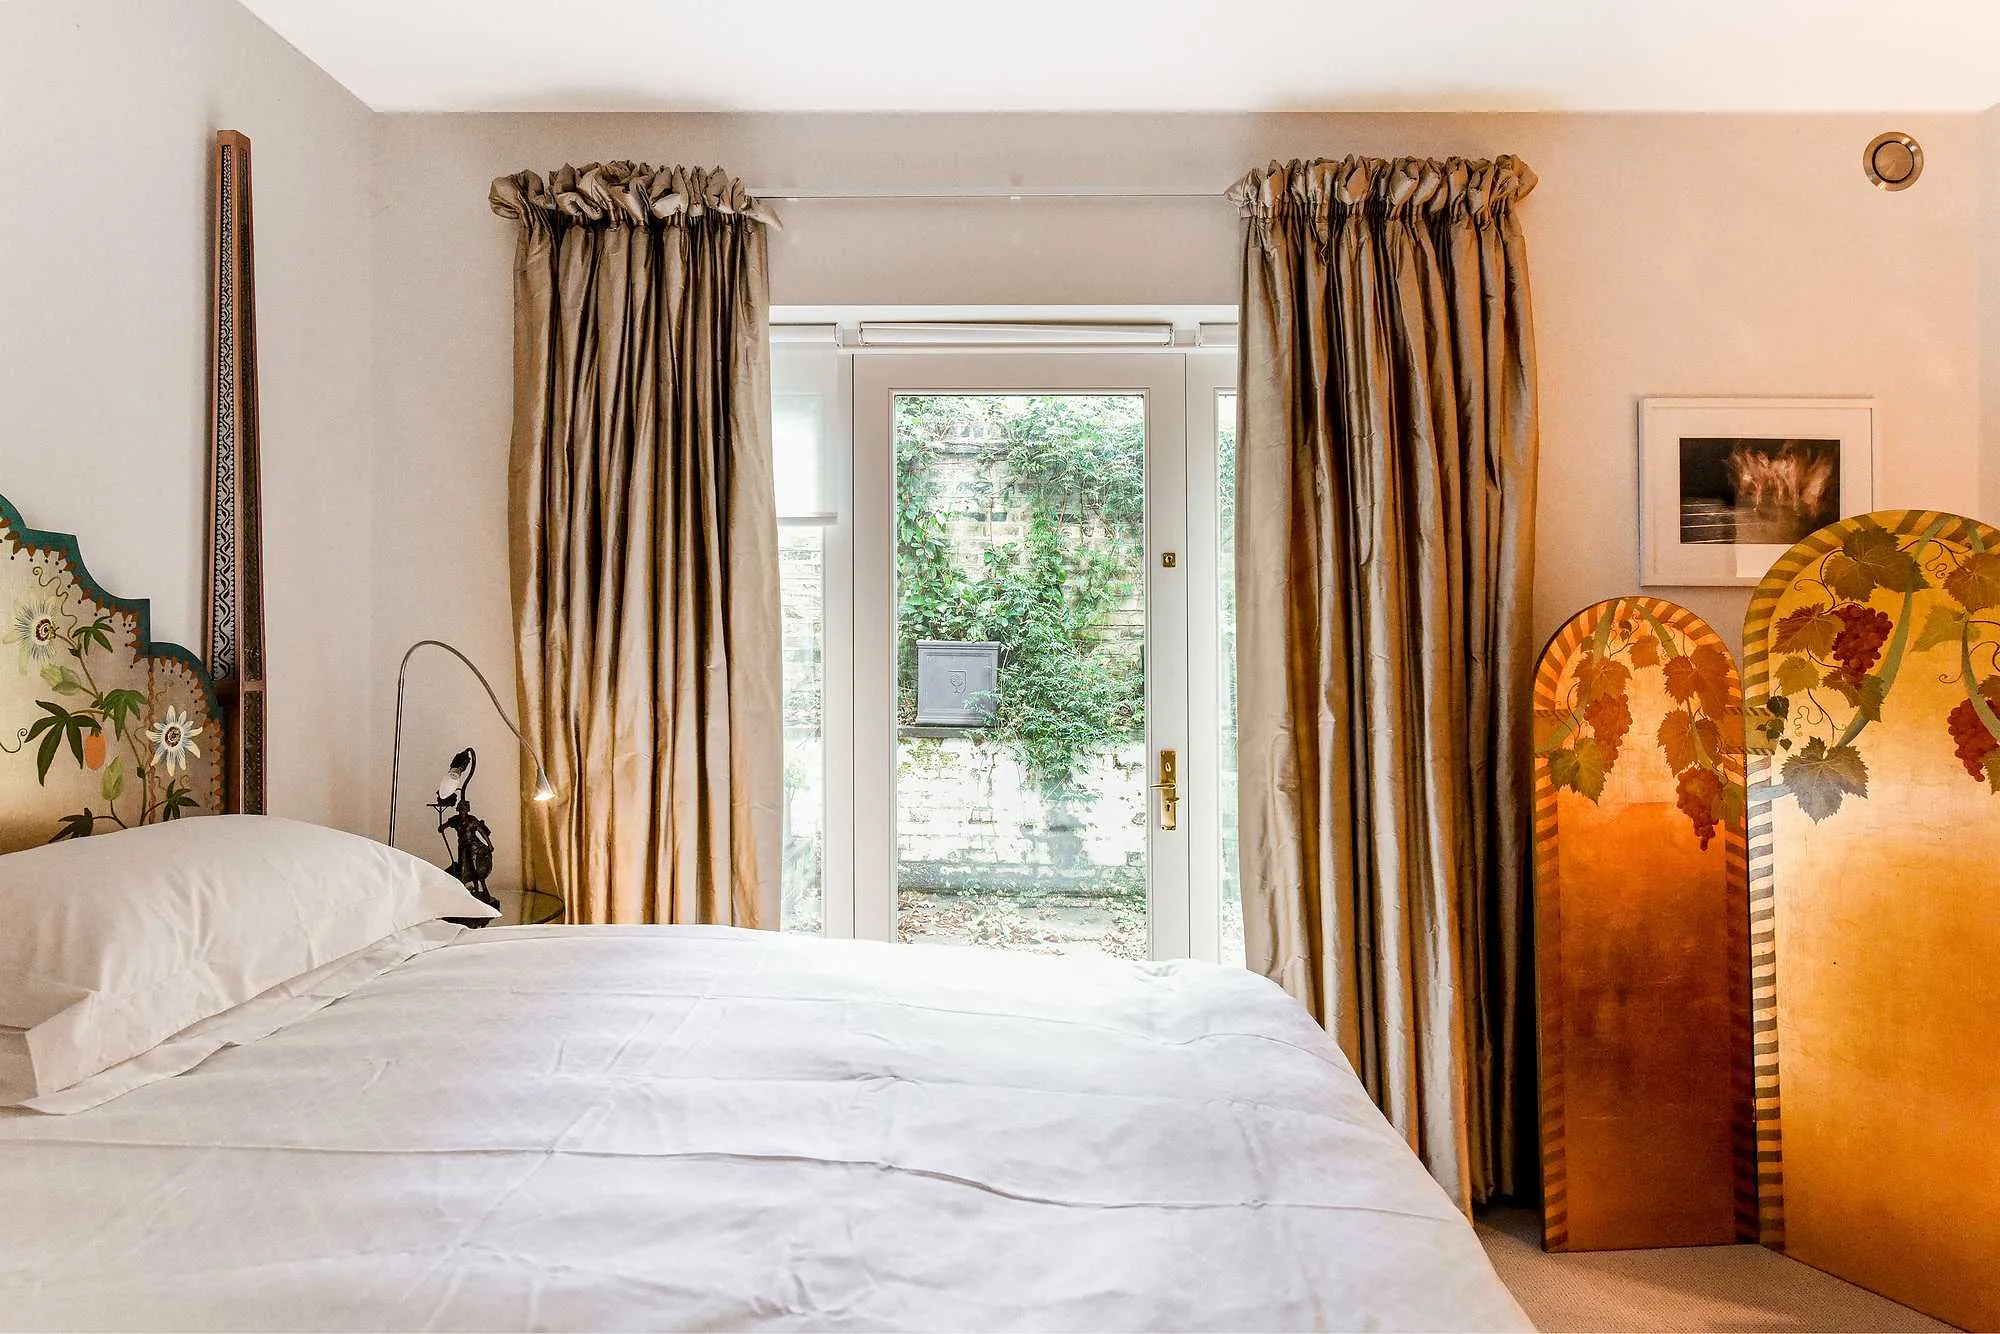 Embankment Gardens, holiday apartment in Chelsea, London